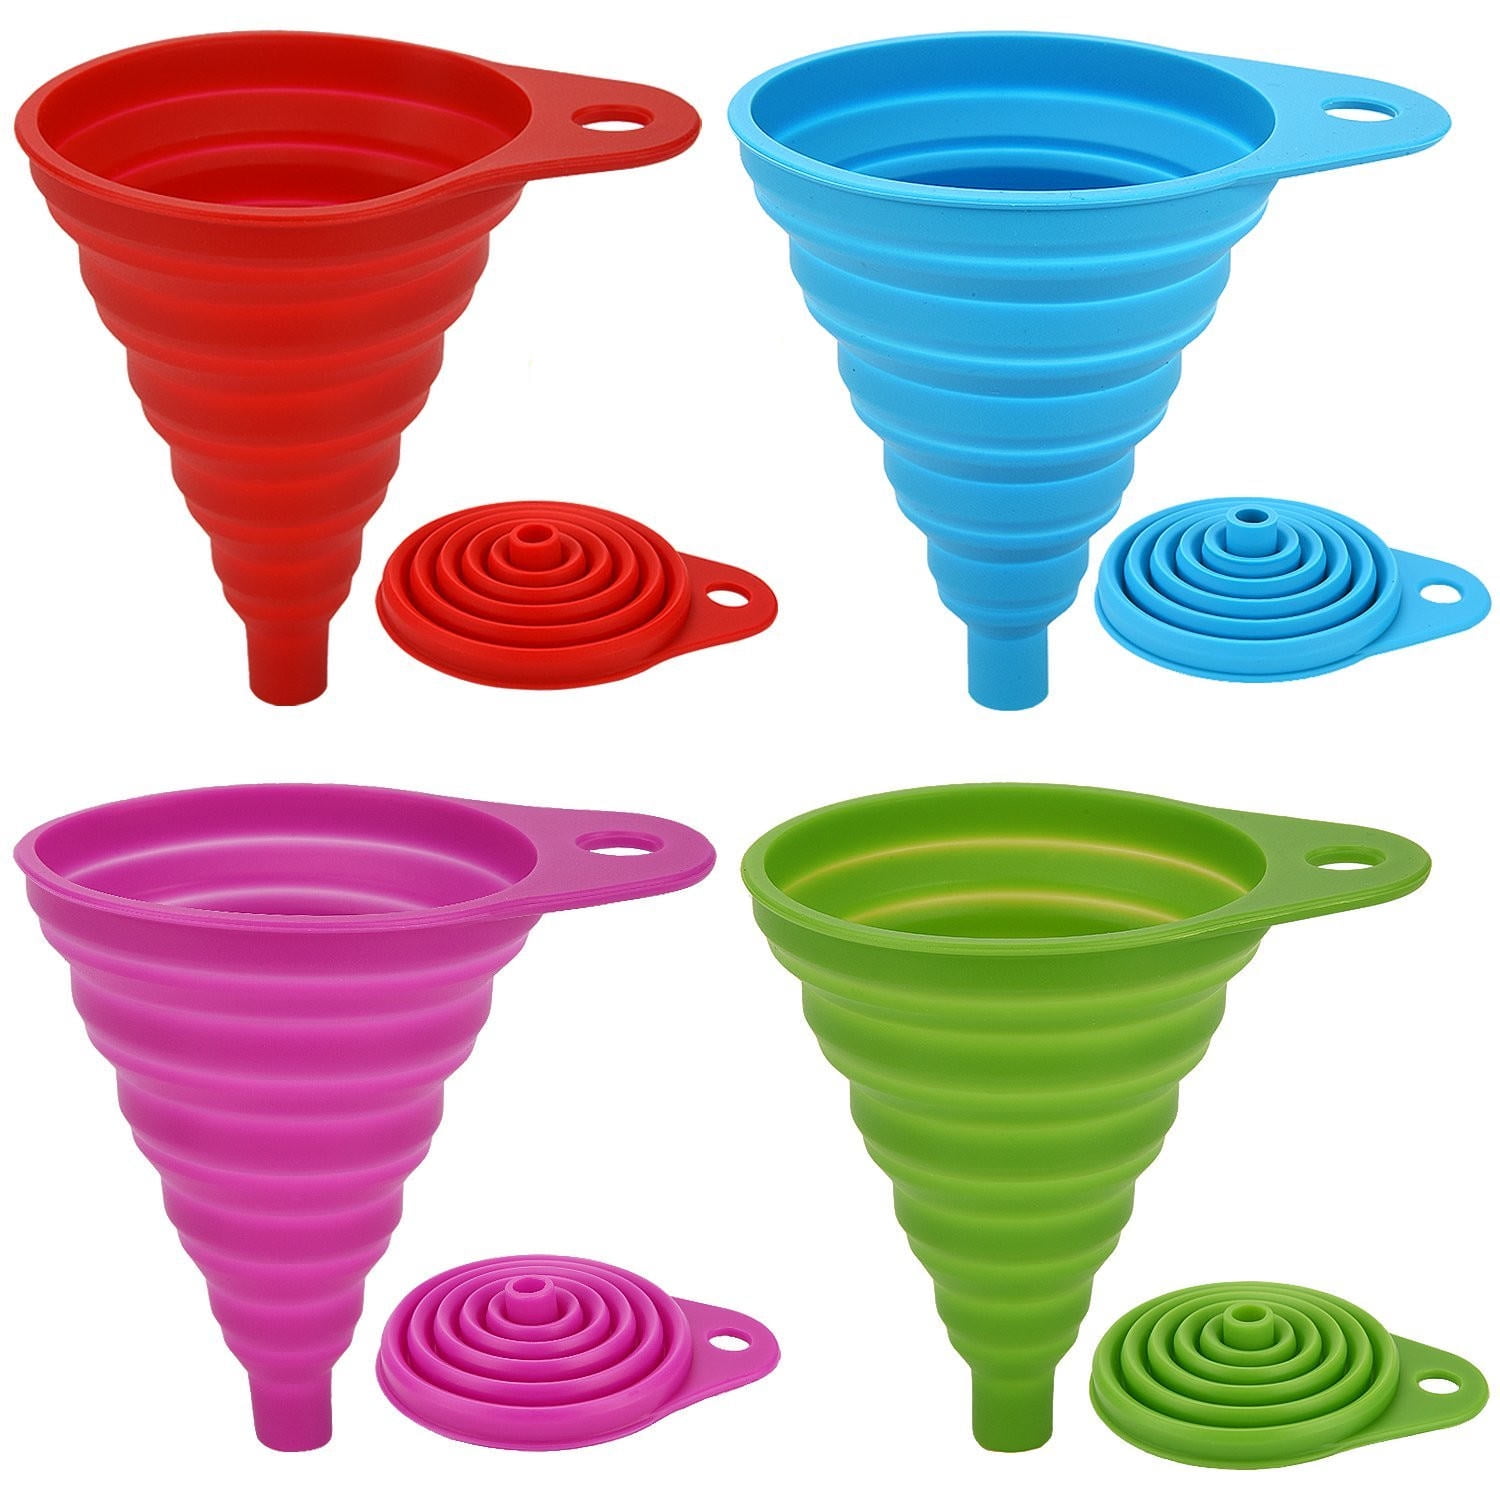 New Flexible Silicone Kitchen Oil Collapsible Funnel 